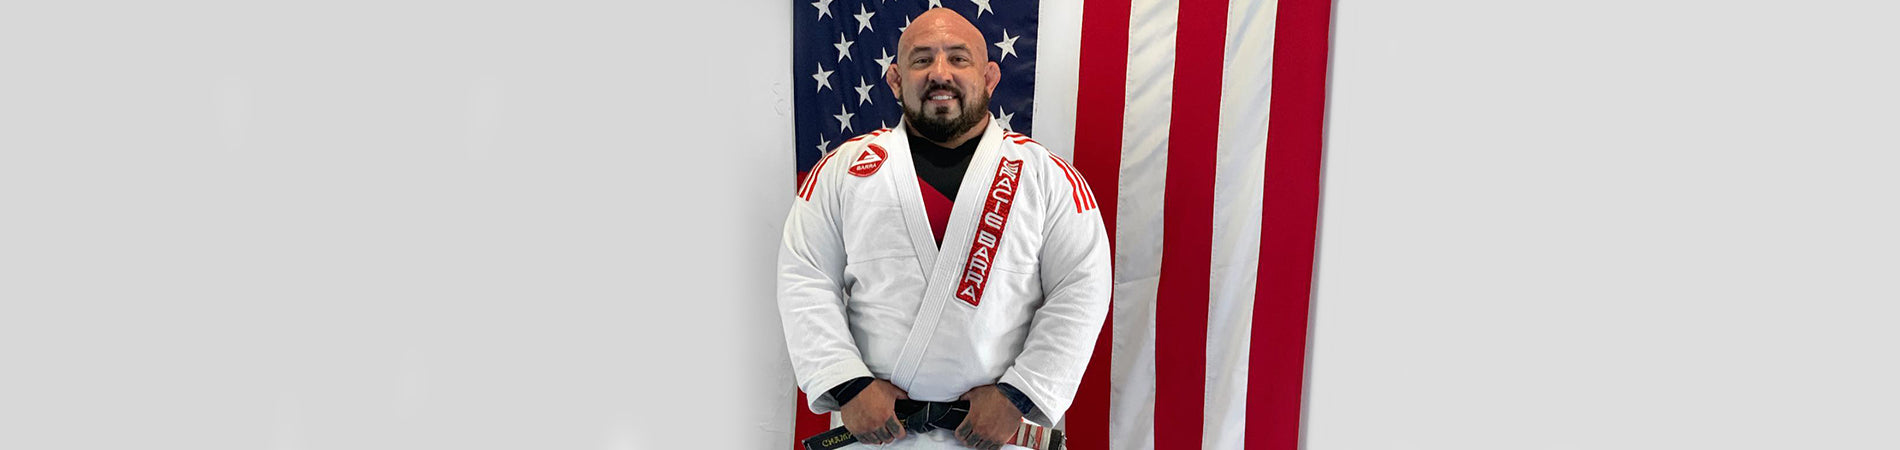 Mystery behind the Sudden Death of ADCC Champion: Orlando Sanchez